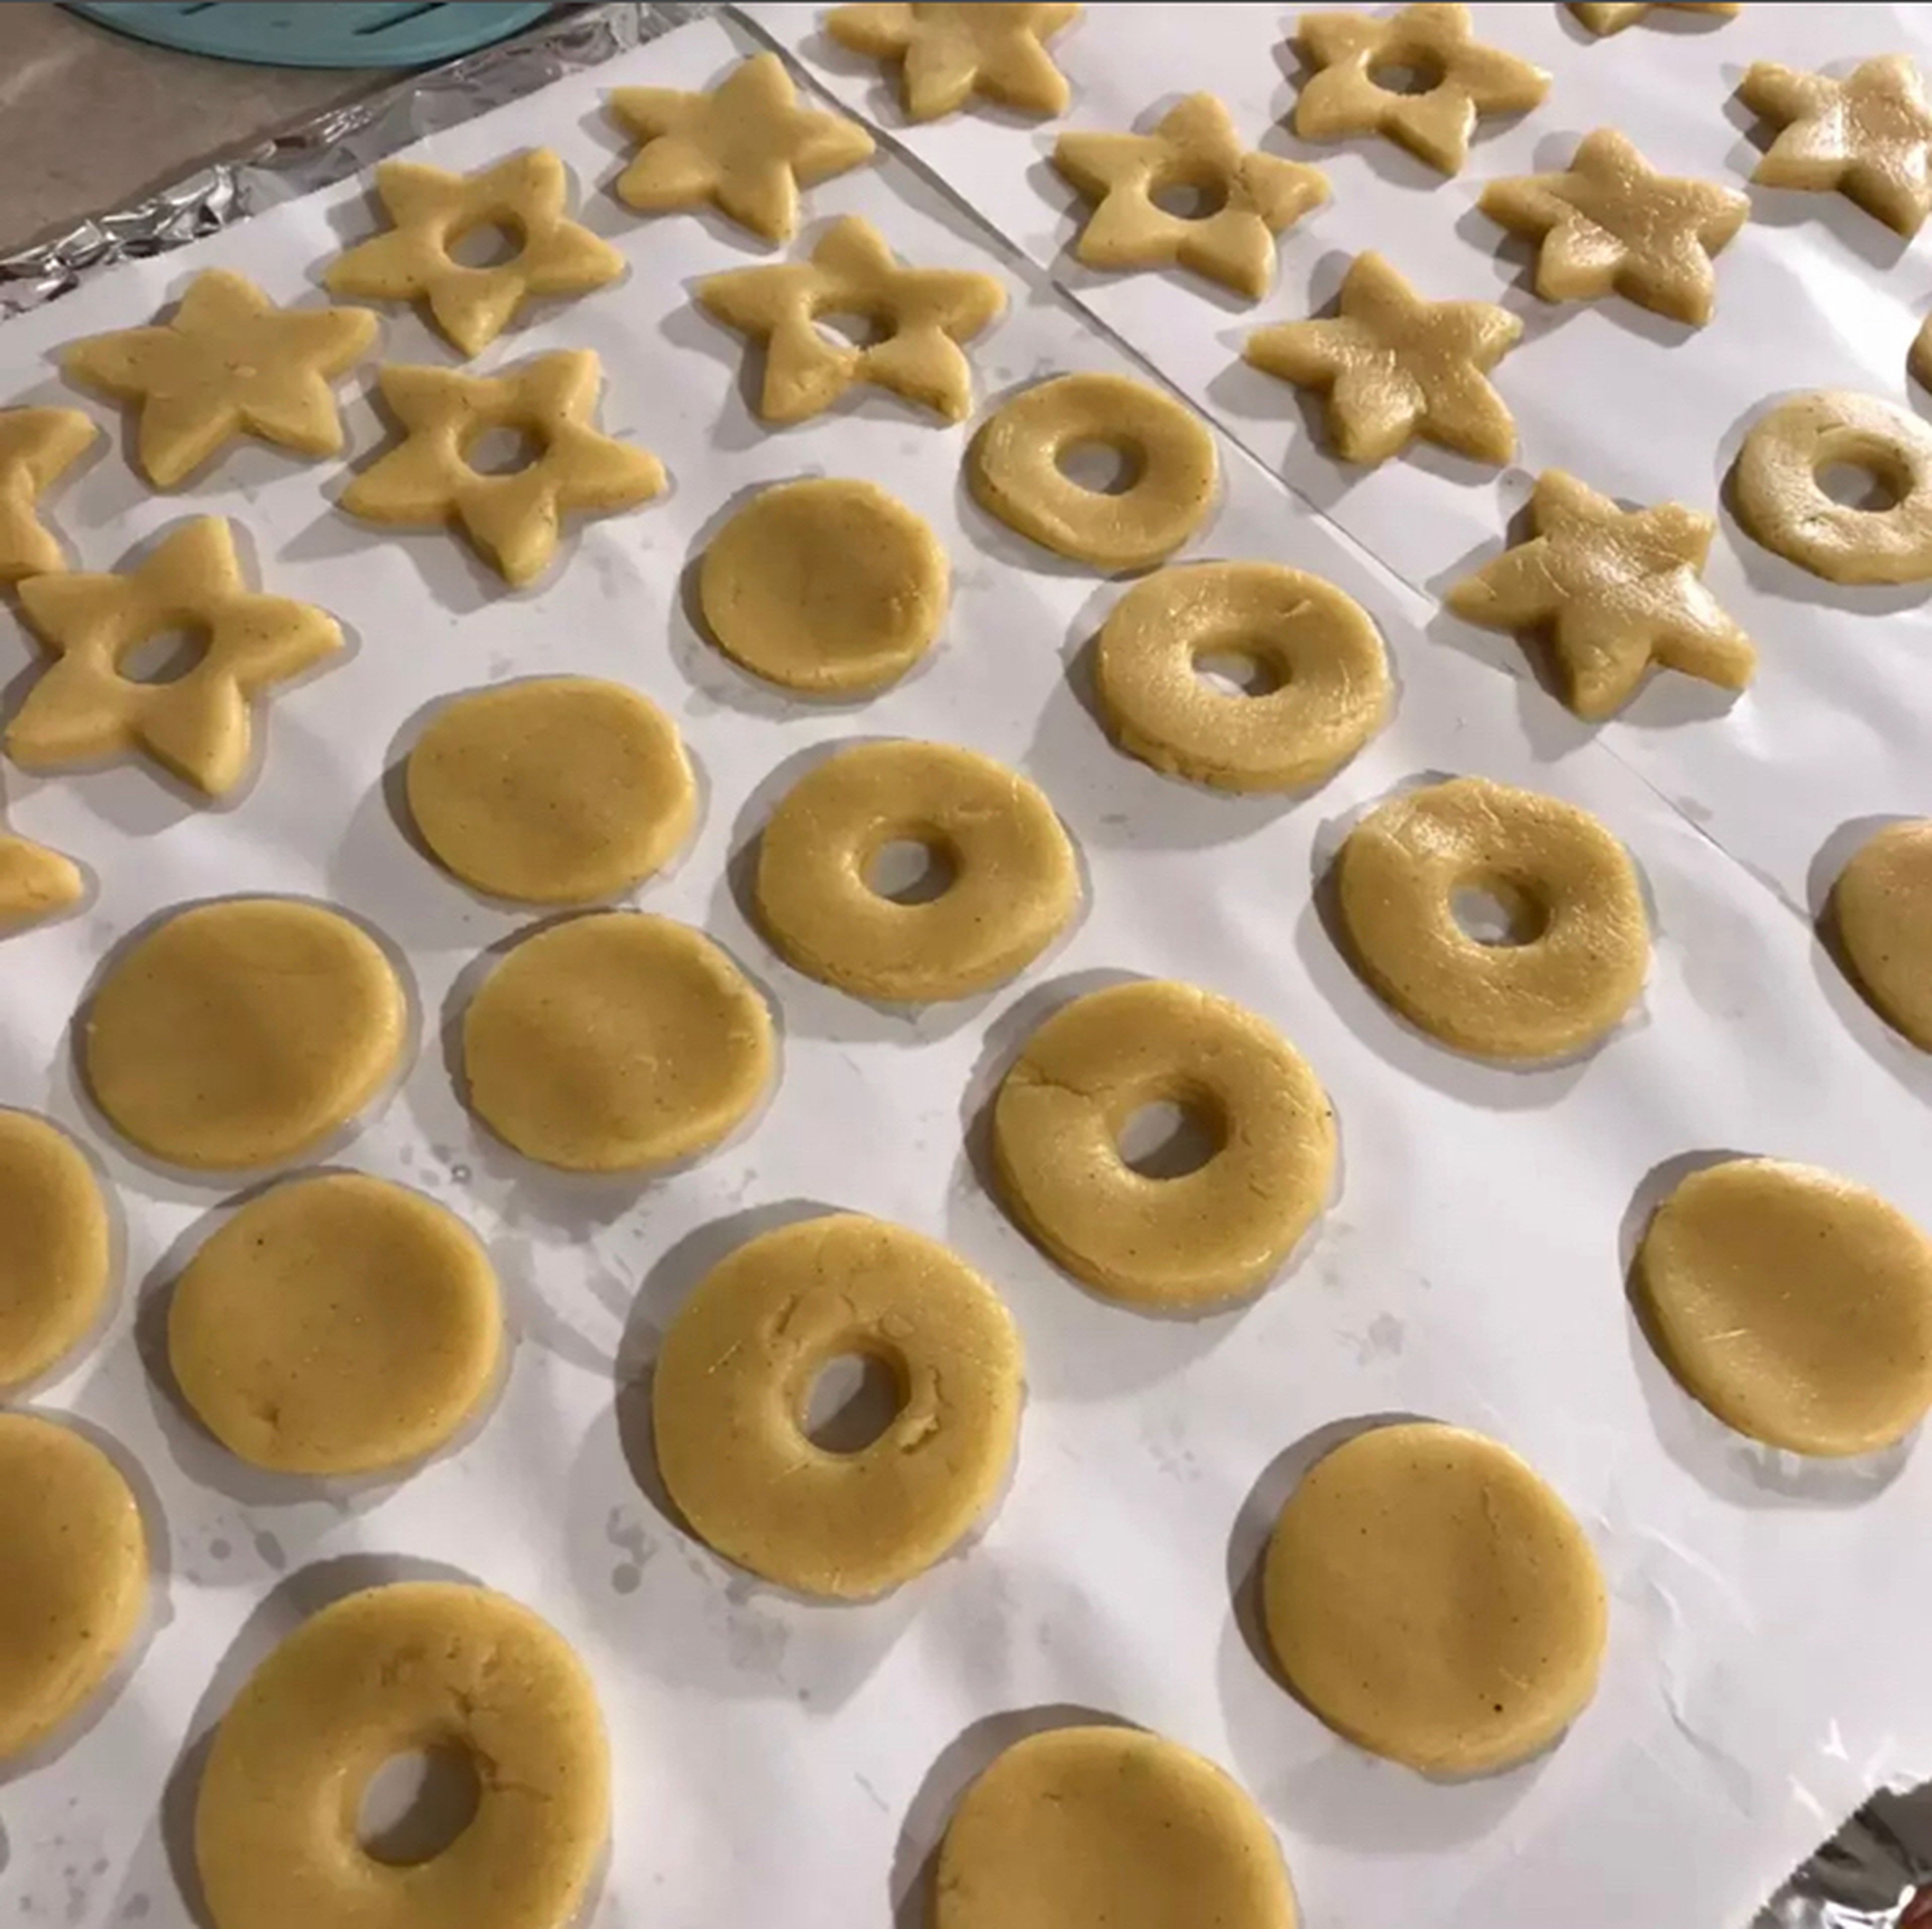 Cut each shape into even numbers and pierce half of them with a small circle. Put all on pastry paper and bake them in preheated oven (170 ° C) for 15-18 minutes.